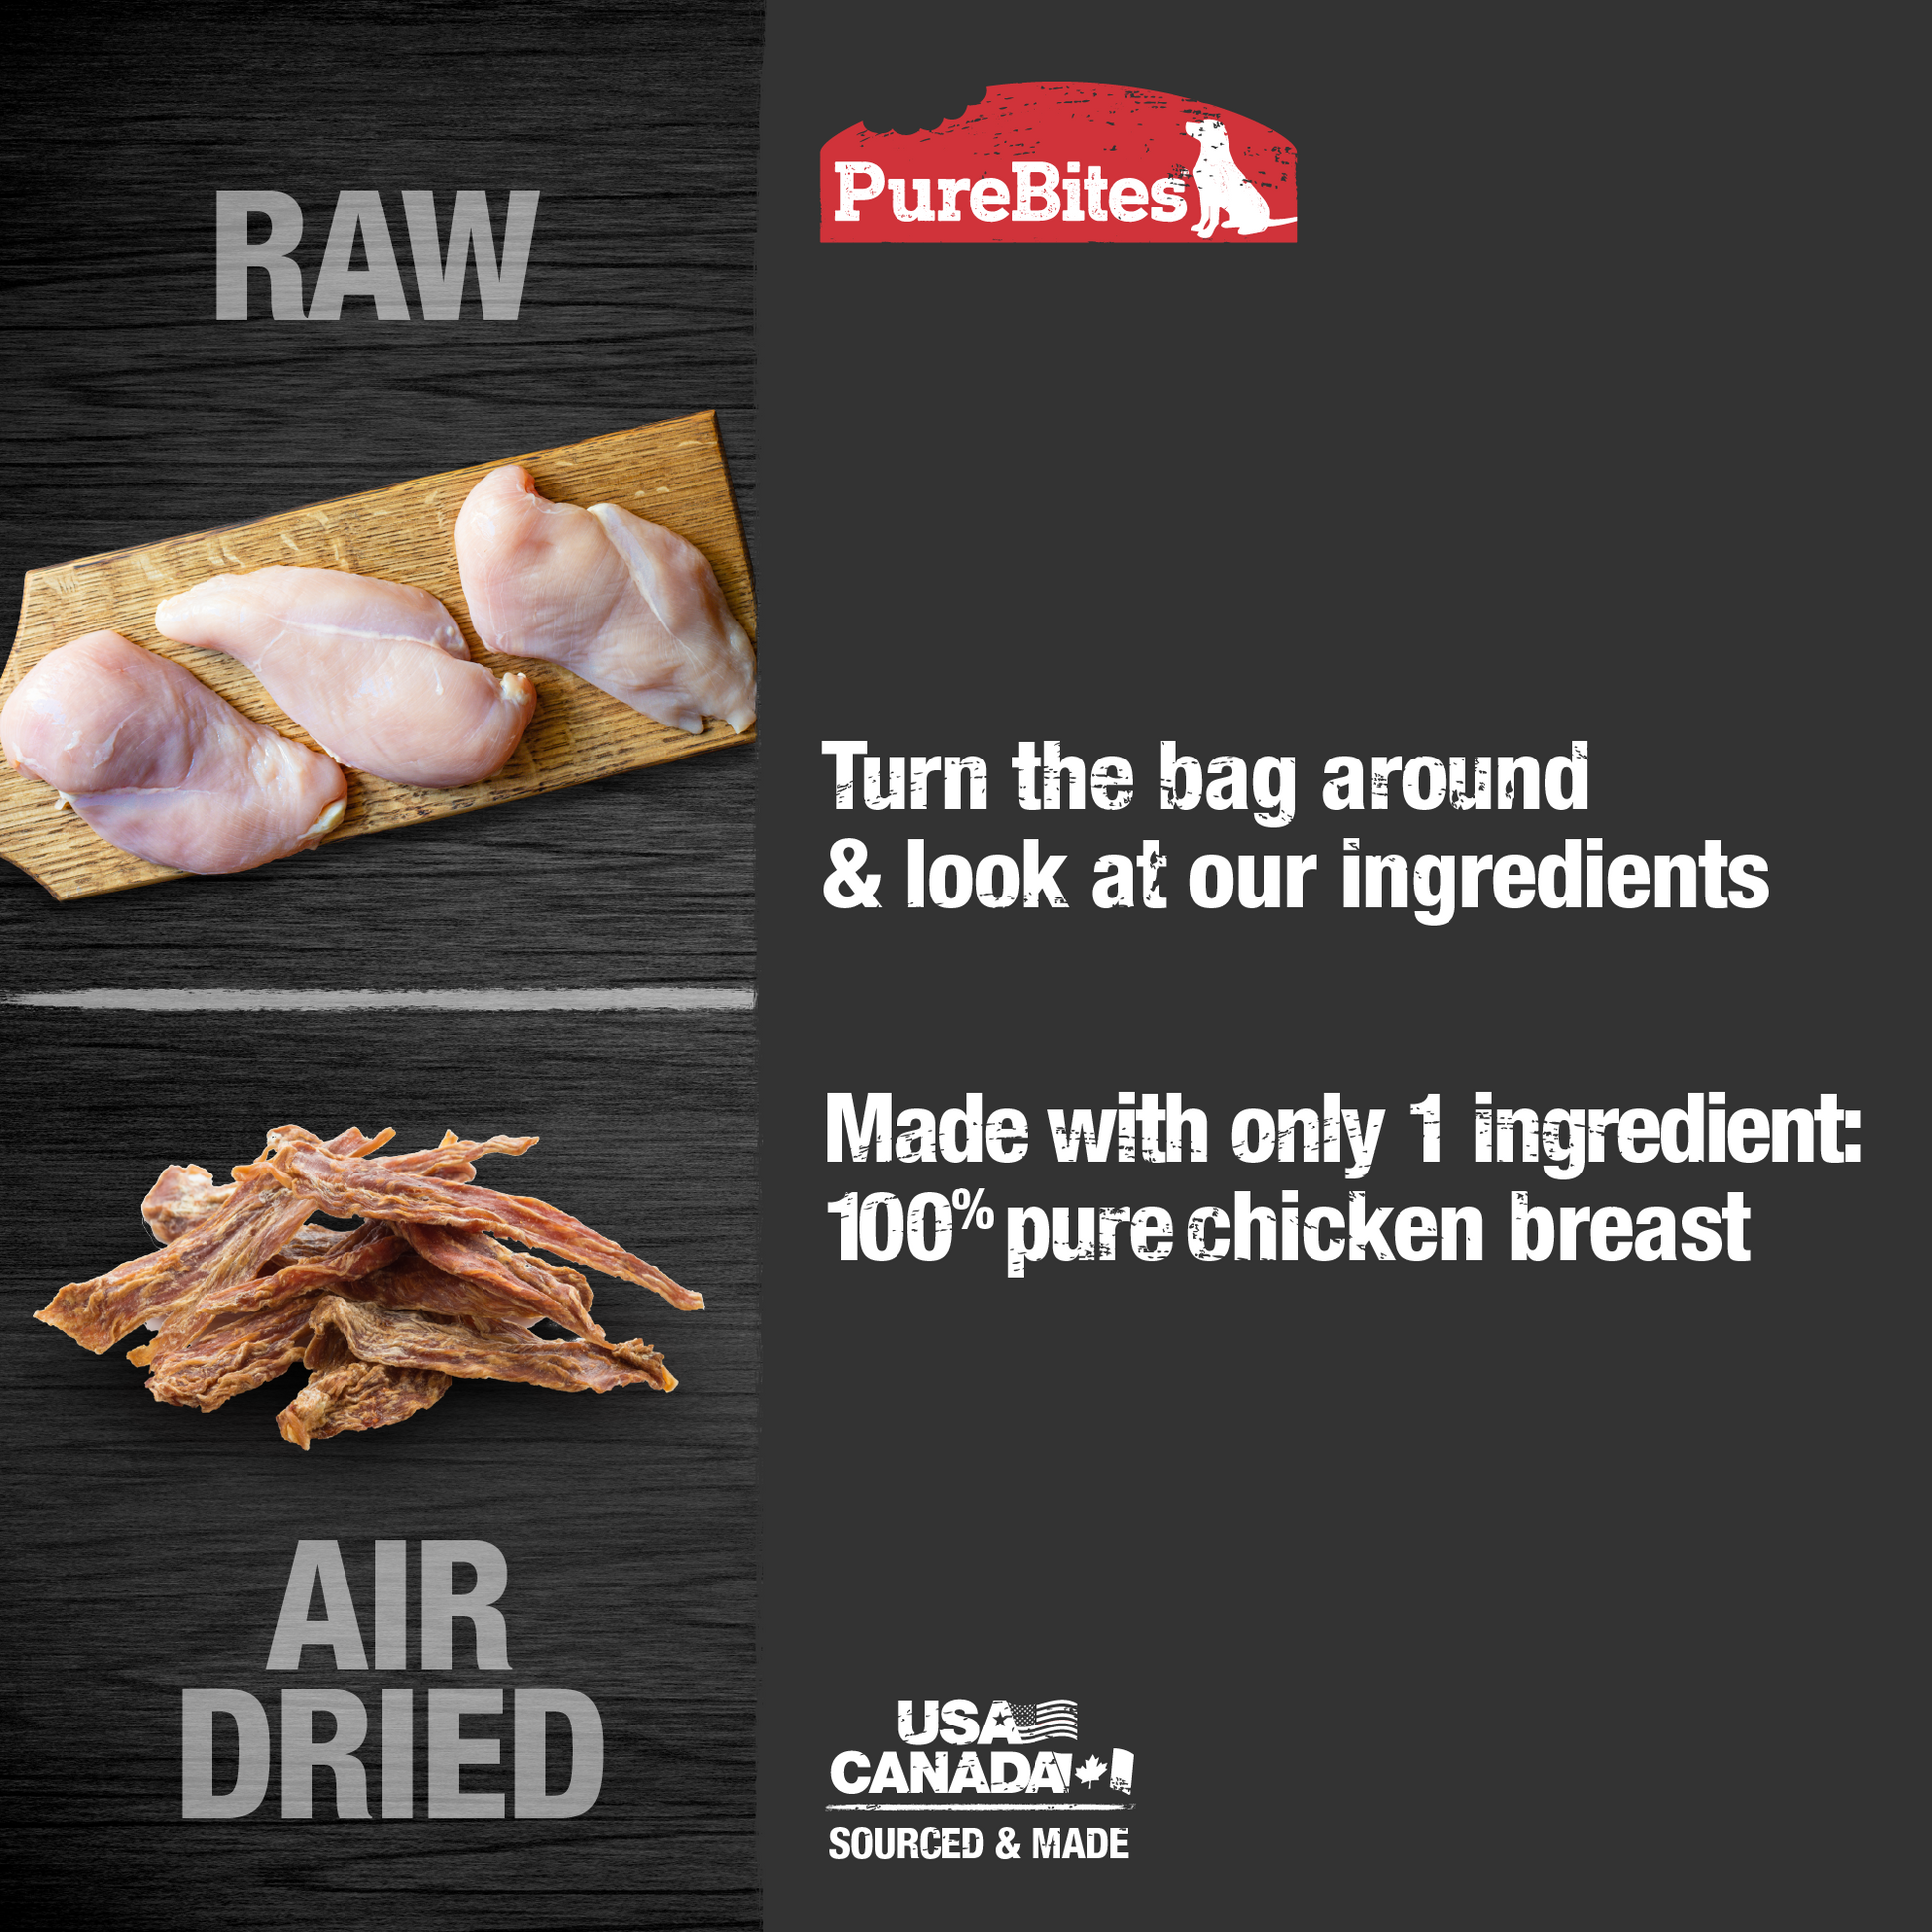 Made with only 1 Ingredient you can read, pronounce, and trust: USA sourced chicken breast.